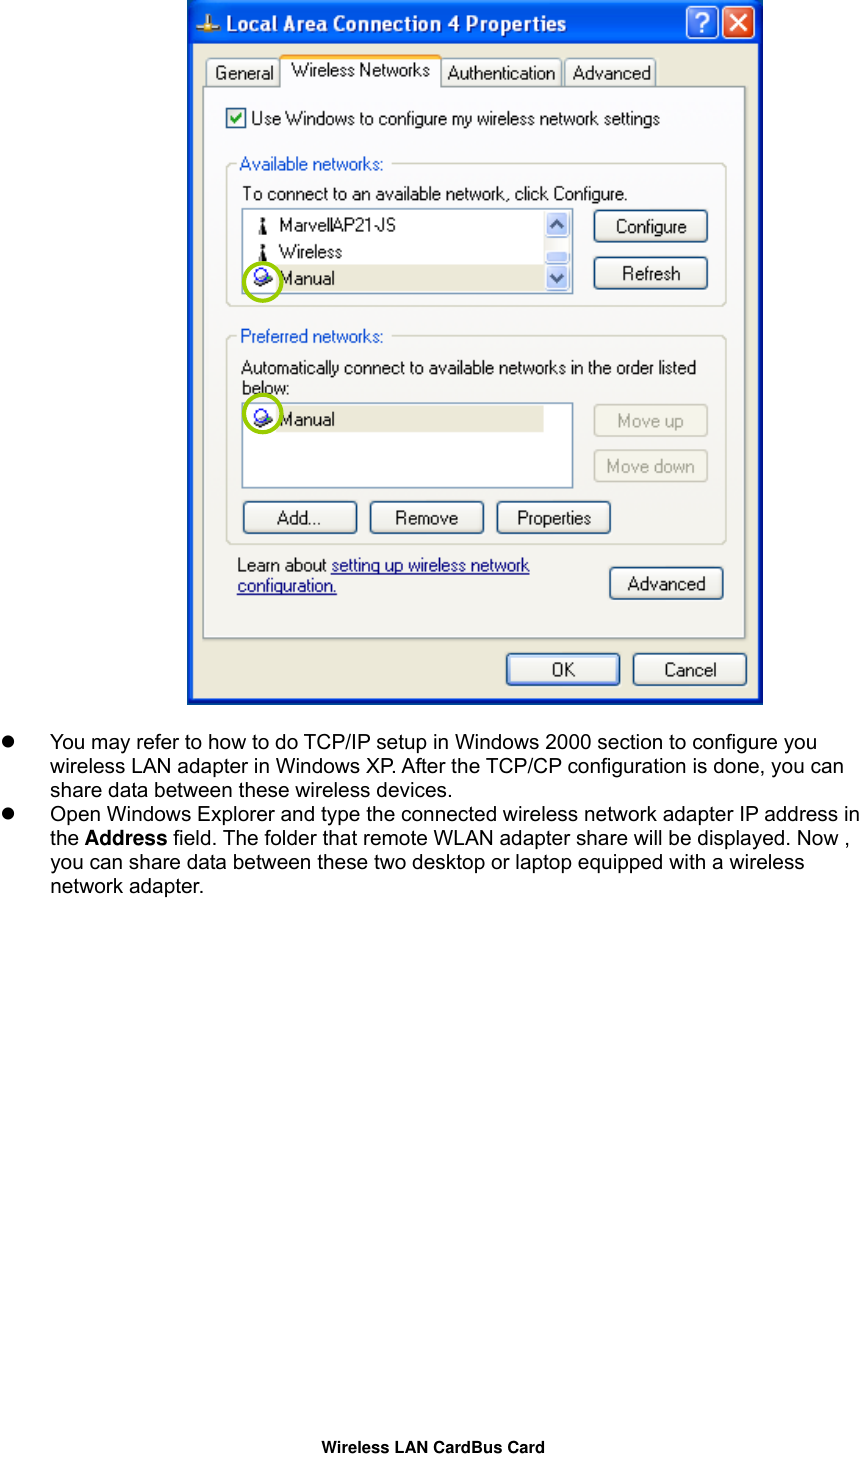    You may refer to how to do TCP/IP setup in Windows 2000 section to configure you wireless LAN adapter in Windows XP. After the TCP/CP configuration is done, you can share data between these wireless devices.   Open Windows Explorer and type the connected wireless network adapter IP address in the Address field. The folder that remote WLAN adapter share will be displayed. Now , you can share data between these two desktop or laptop equipped with a wireless network adapter.   Wireless LAN CardBus Card 